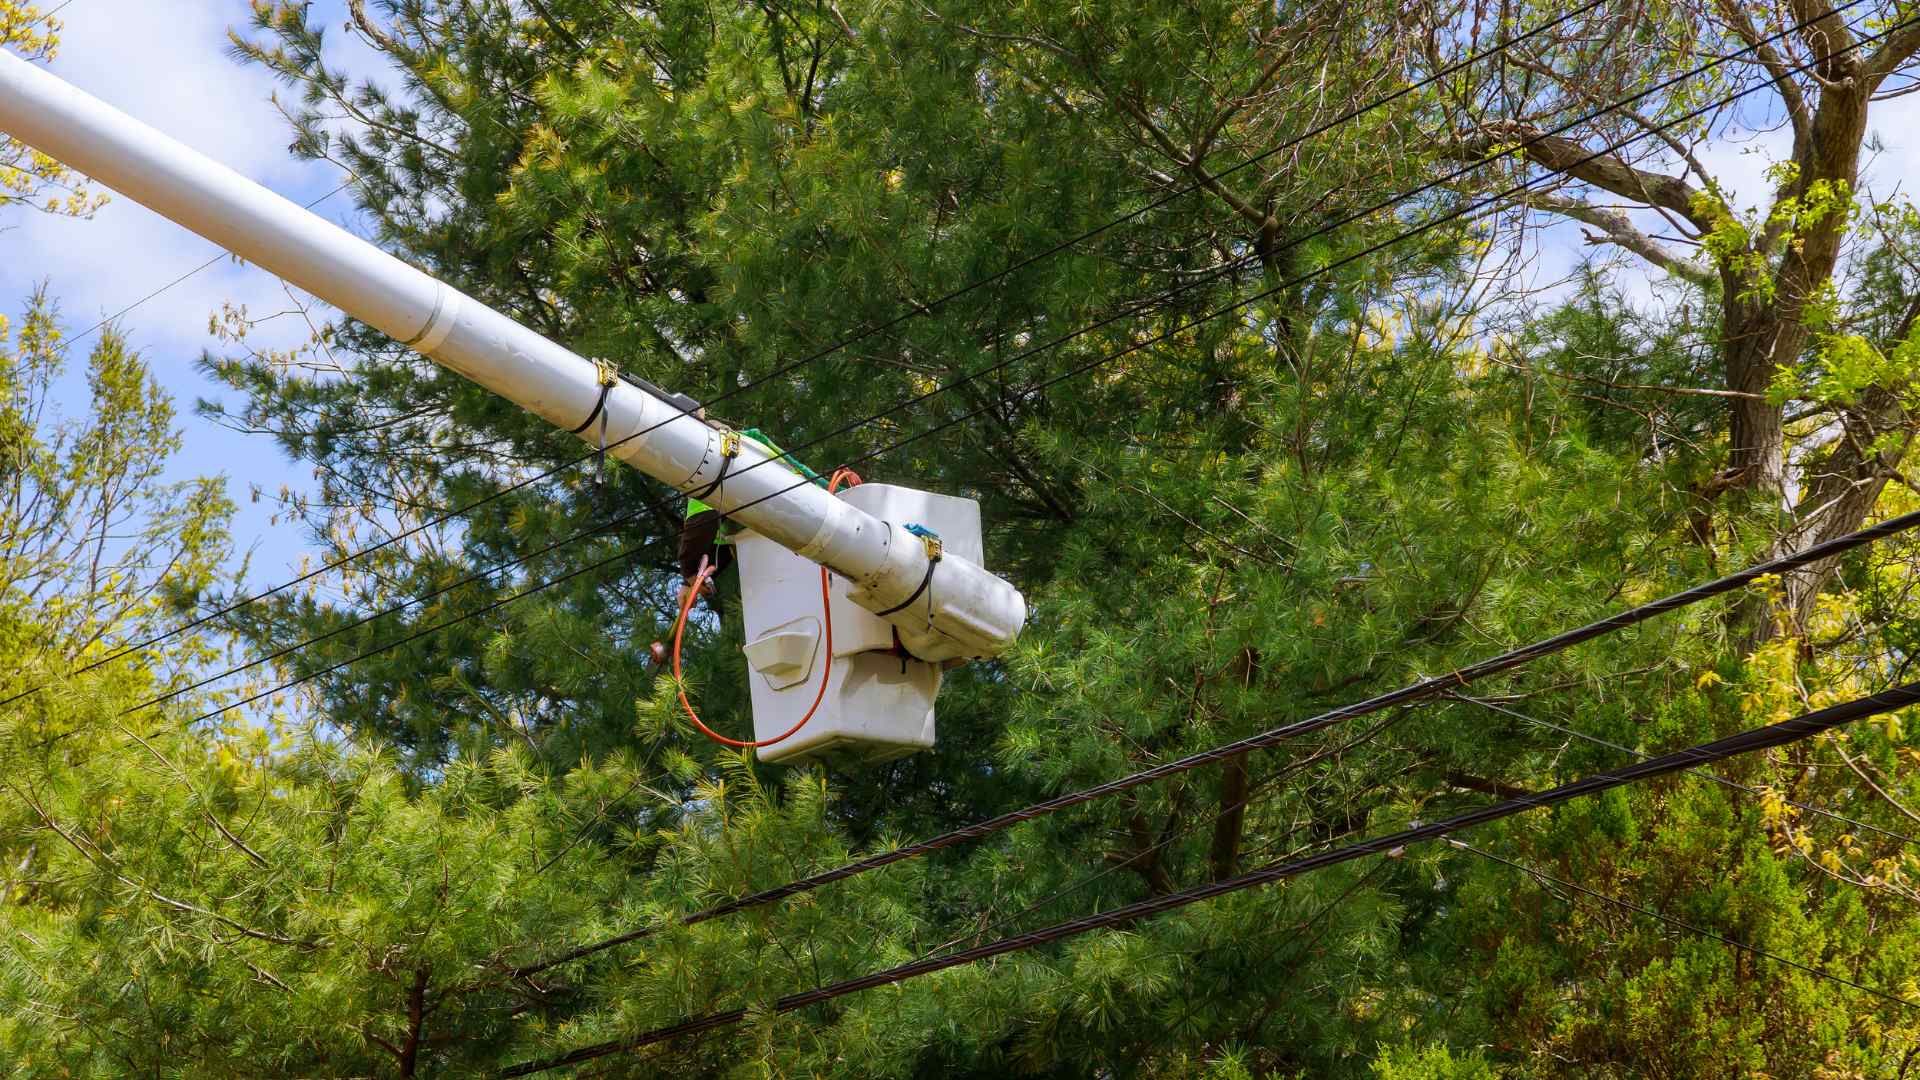 pruning trees near power lines safely